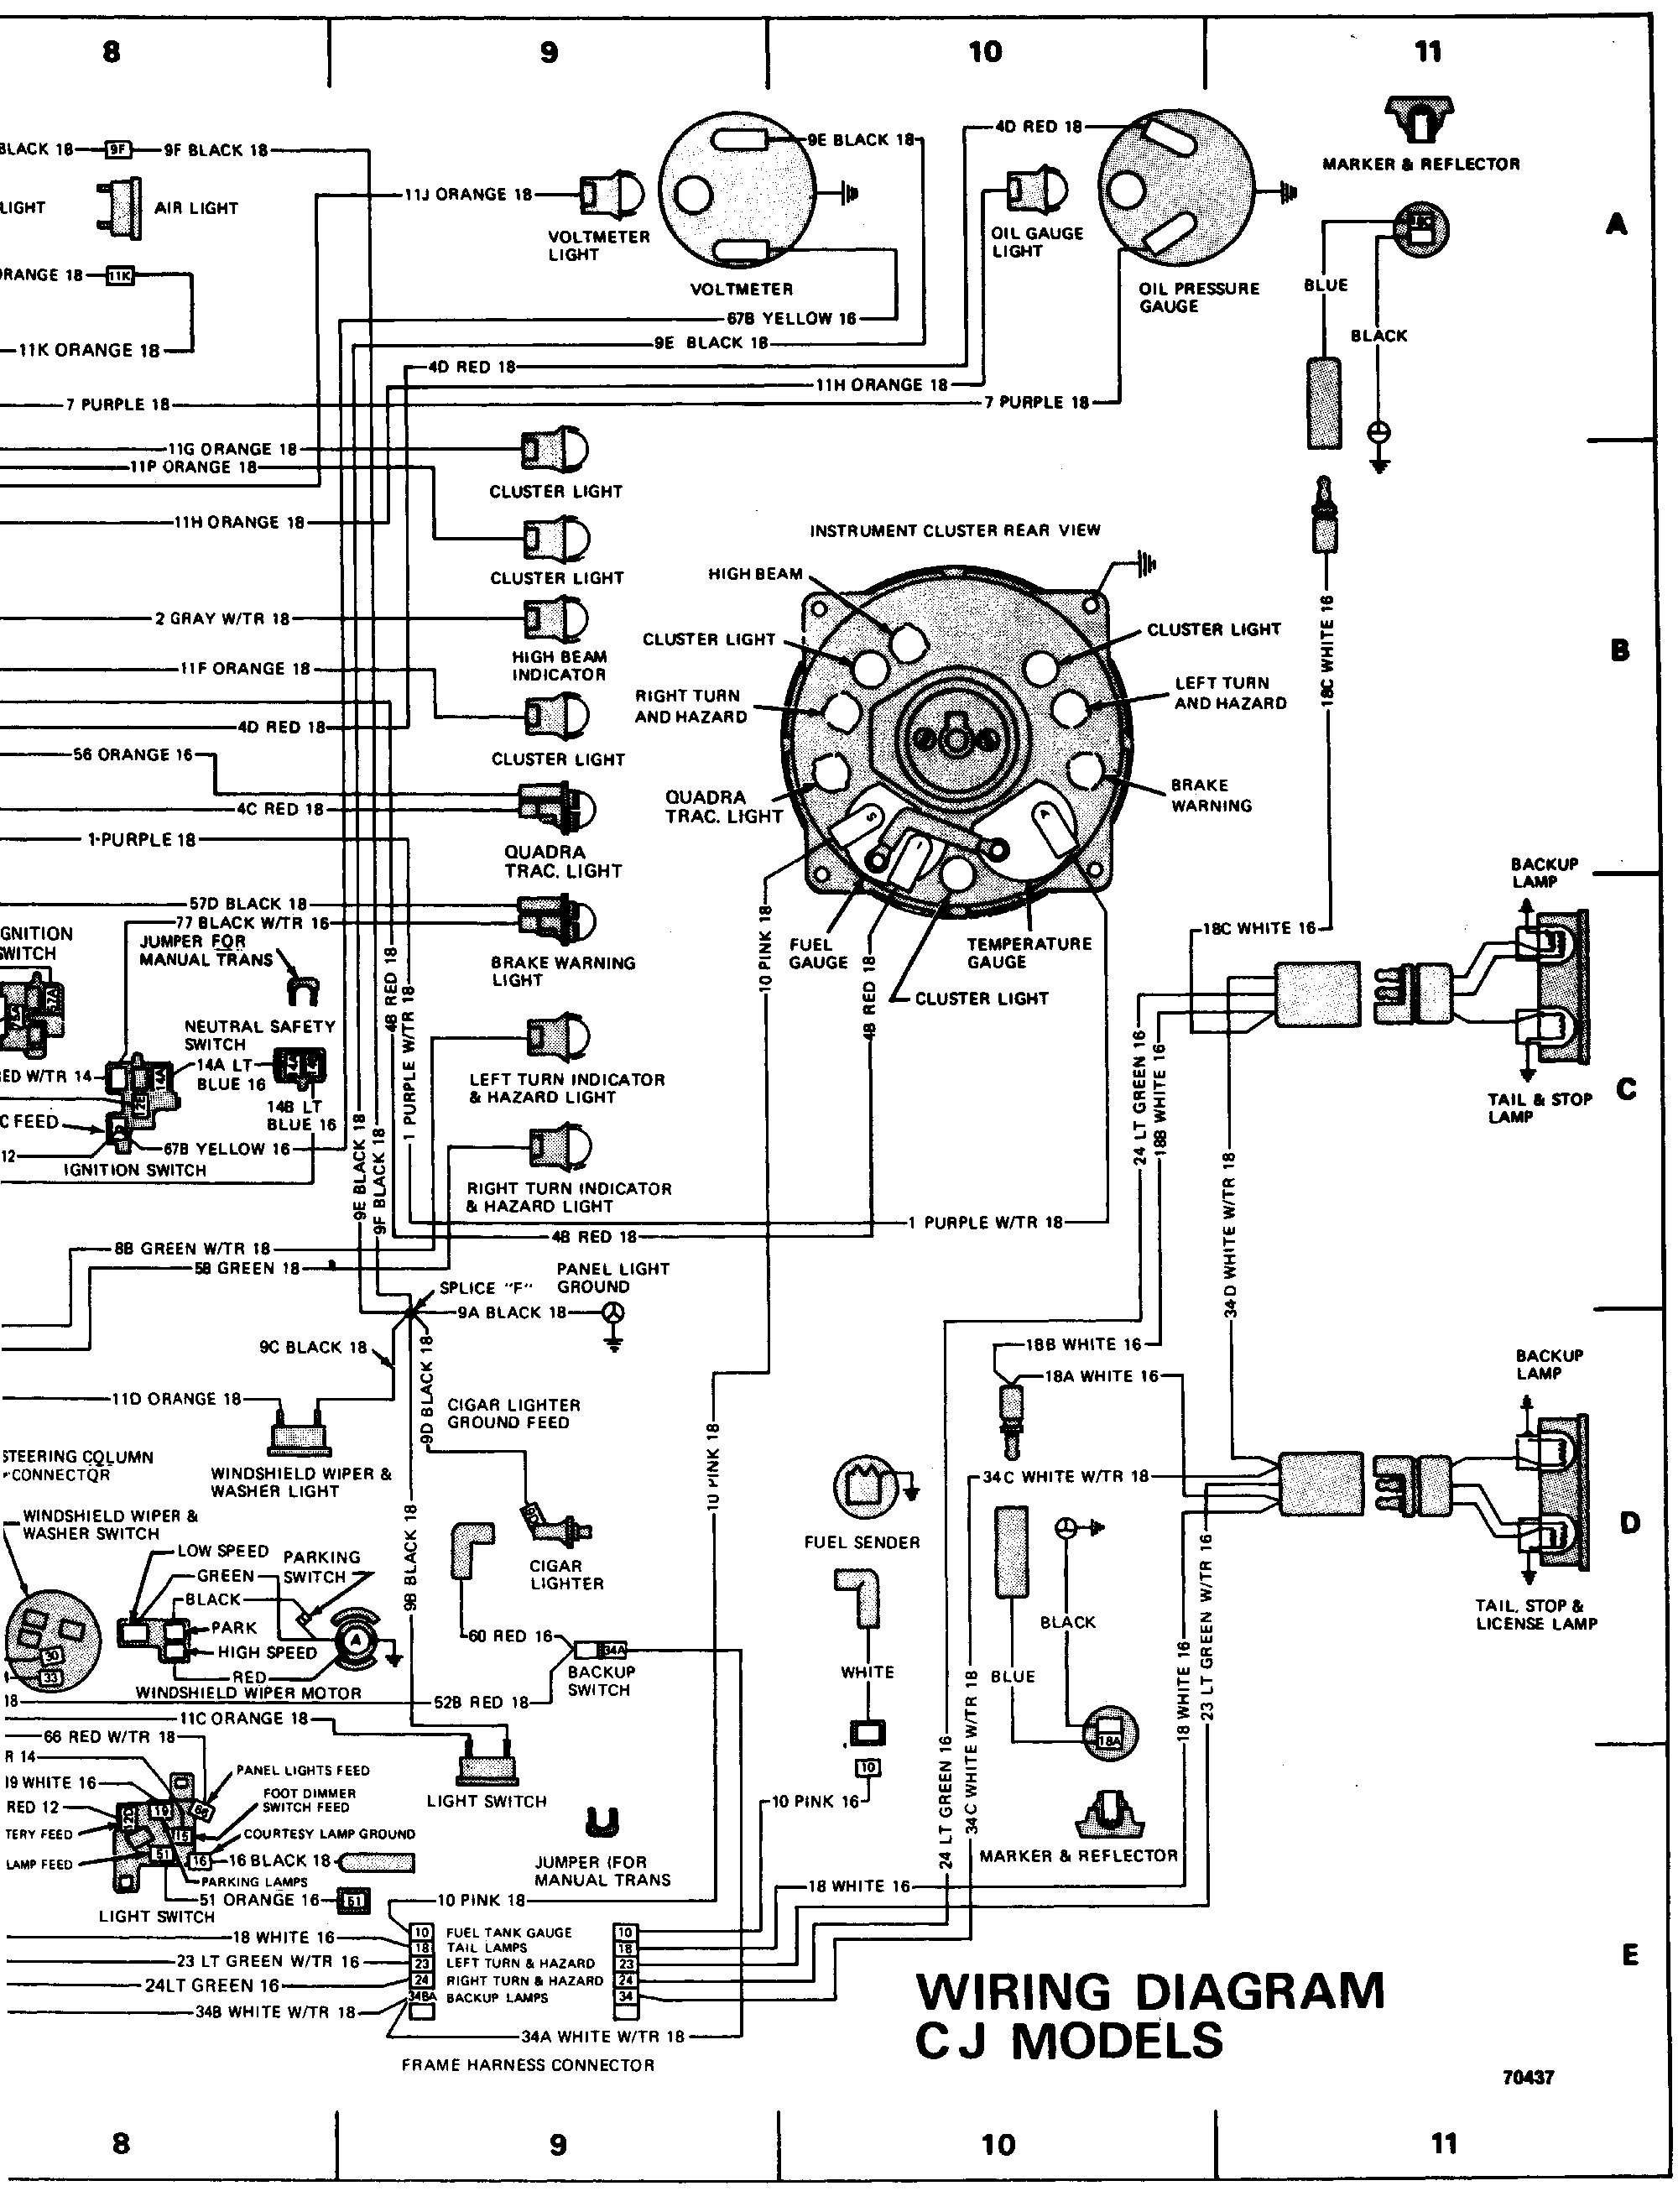 Gallery of Inspirational Painless Wiring Harness Diagram